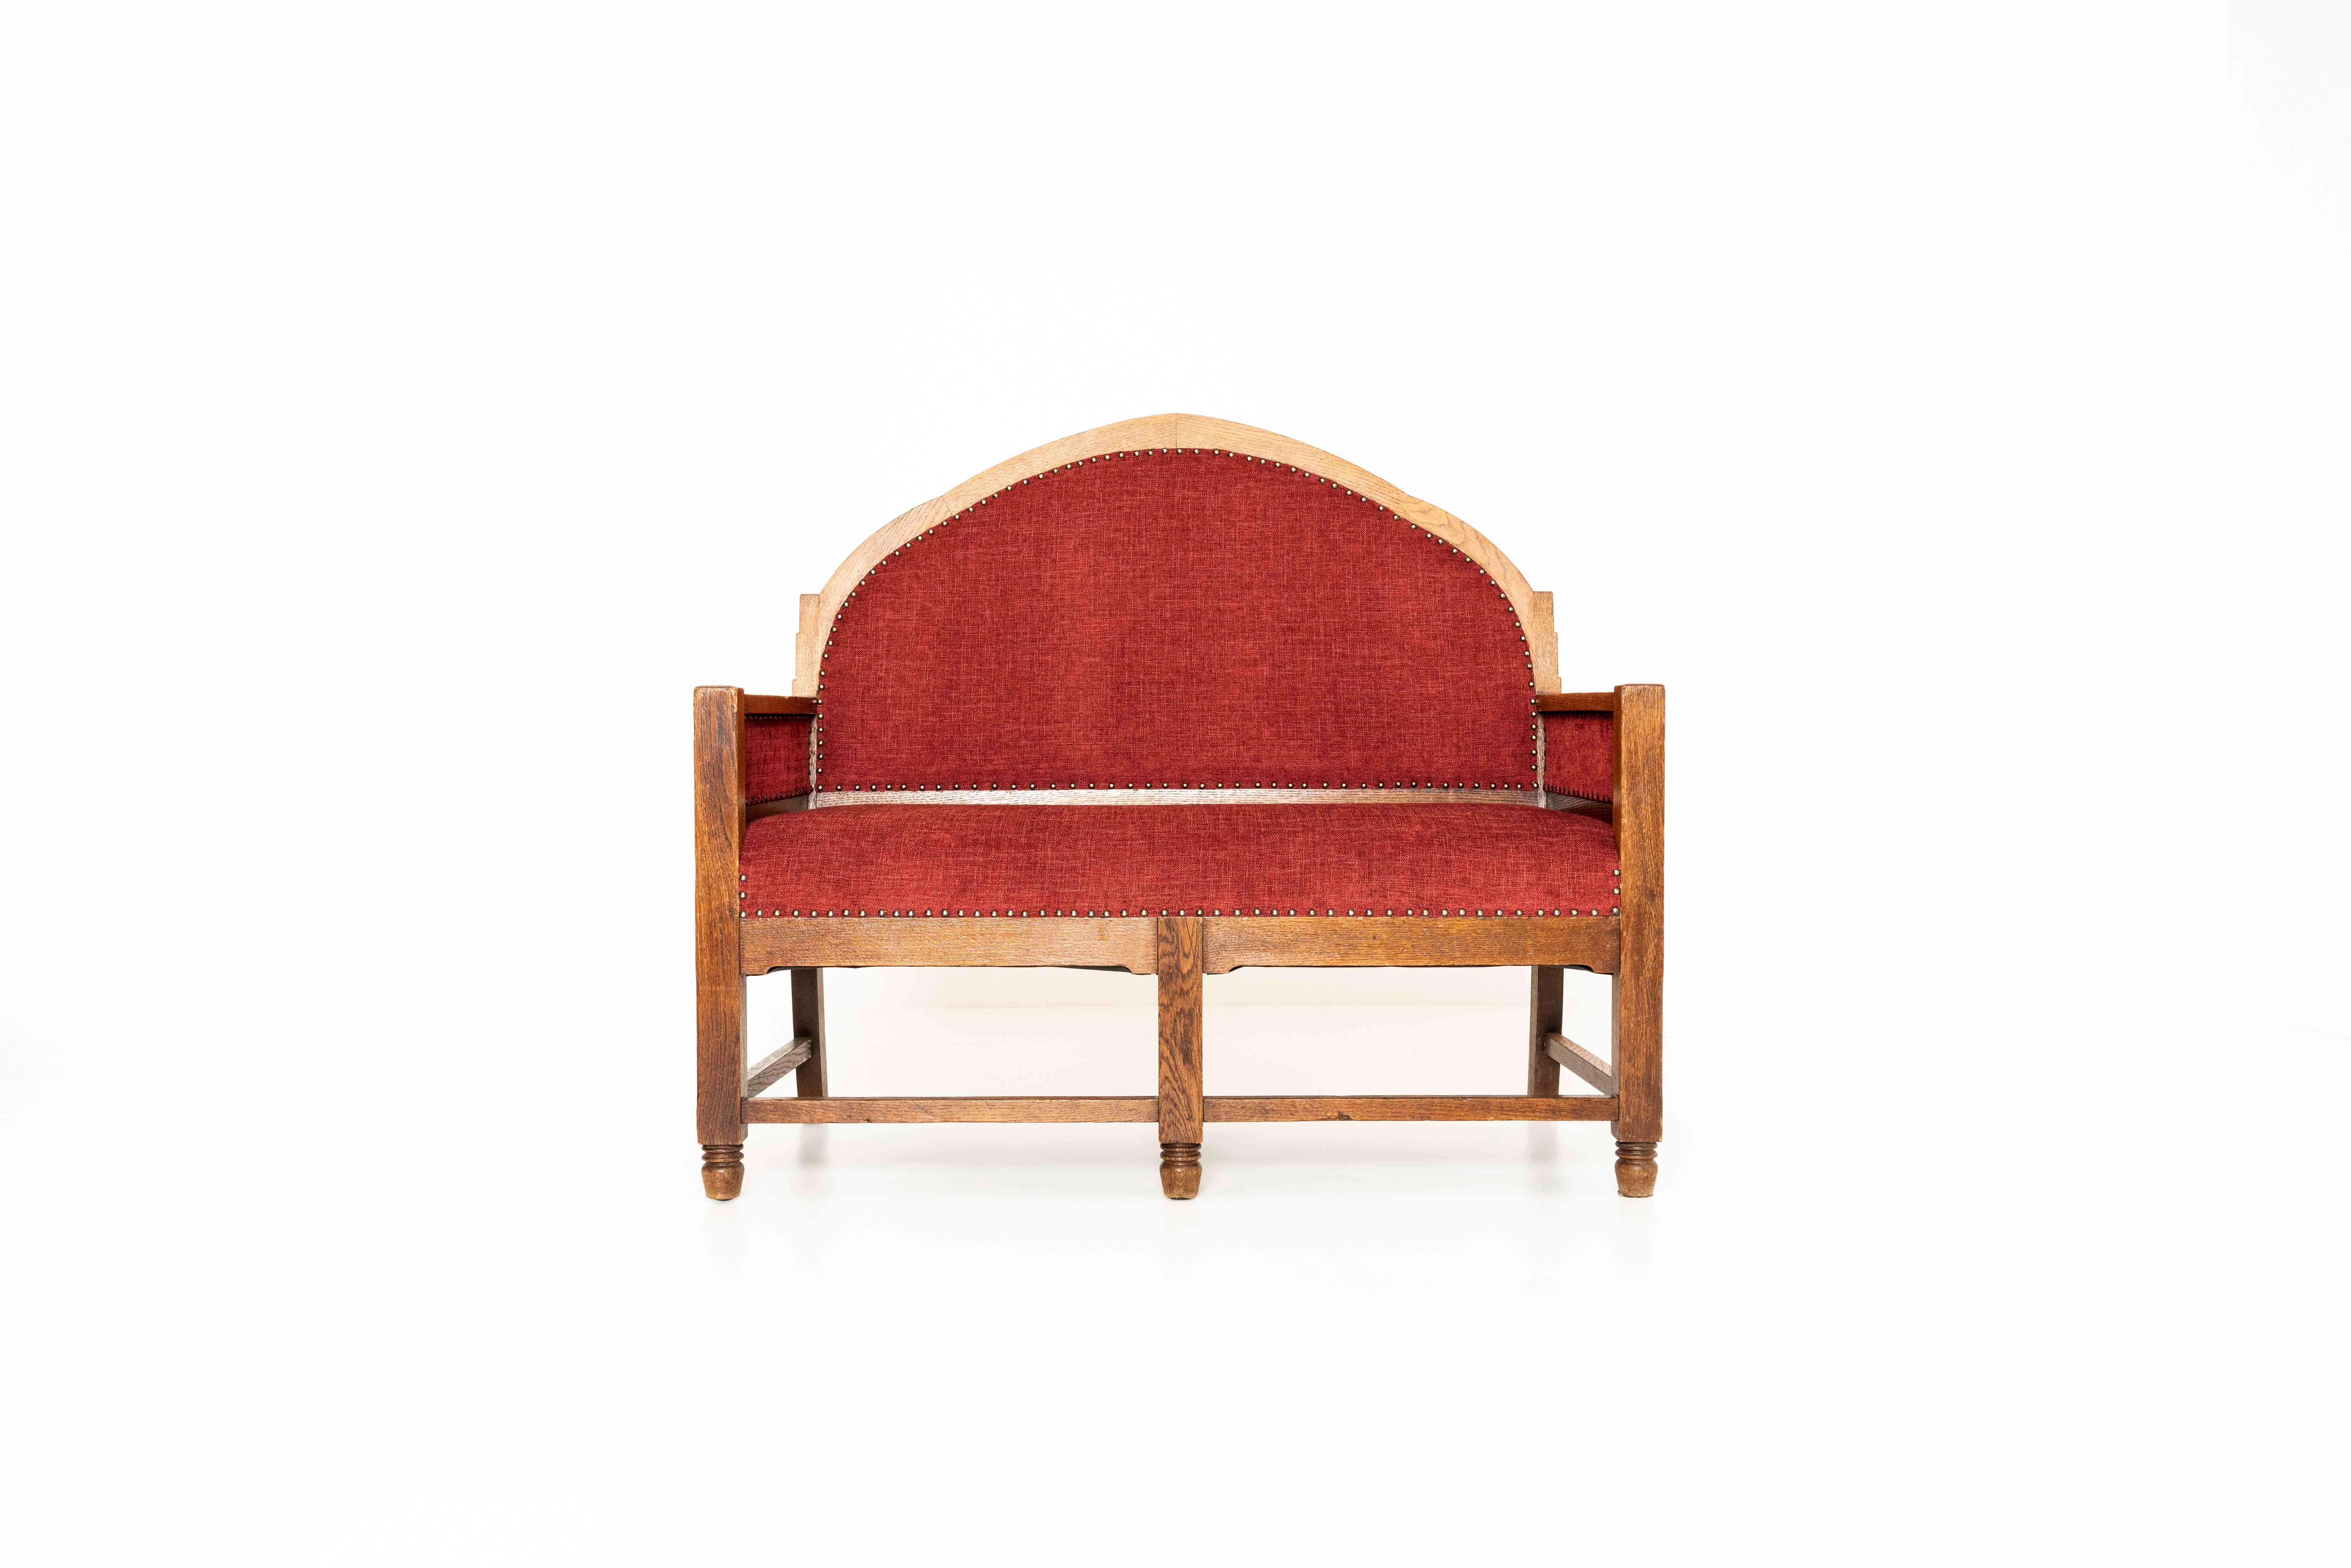 Charming Amsterdam School hall bench or sofa. This bench has a minimalistic and functional design with an oak wooden base. The wooden structure has nice details which can be seen on the feet of the bench. It has been completely re-upholstered in an